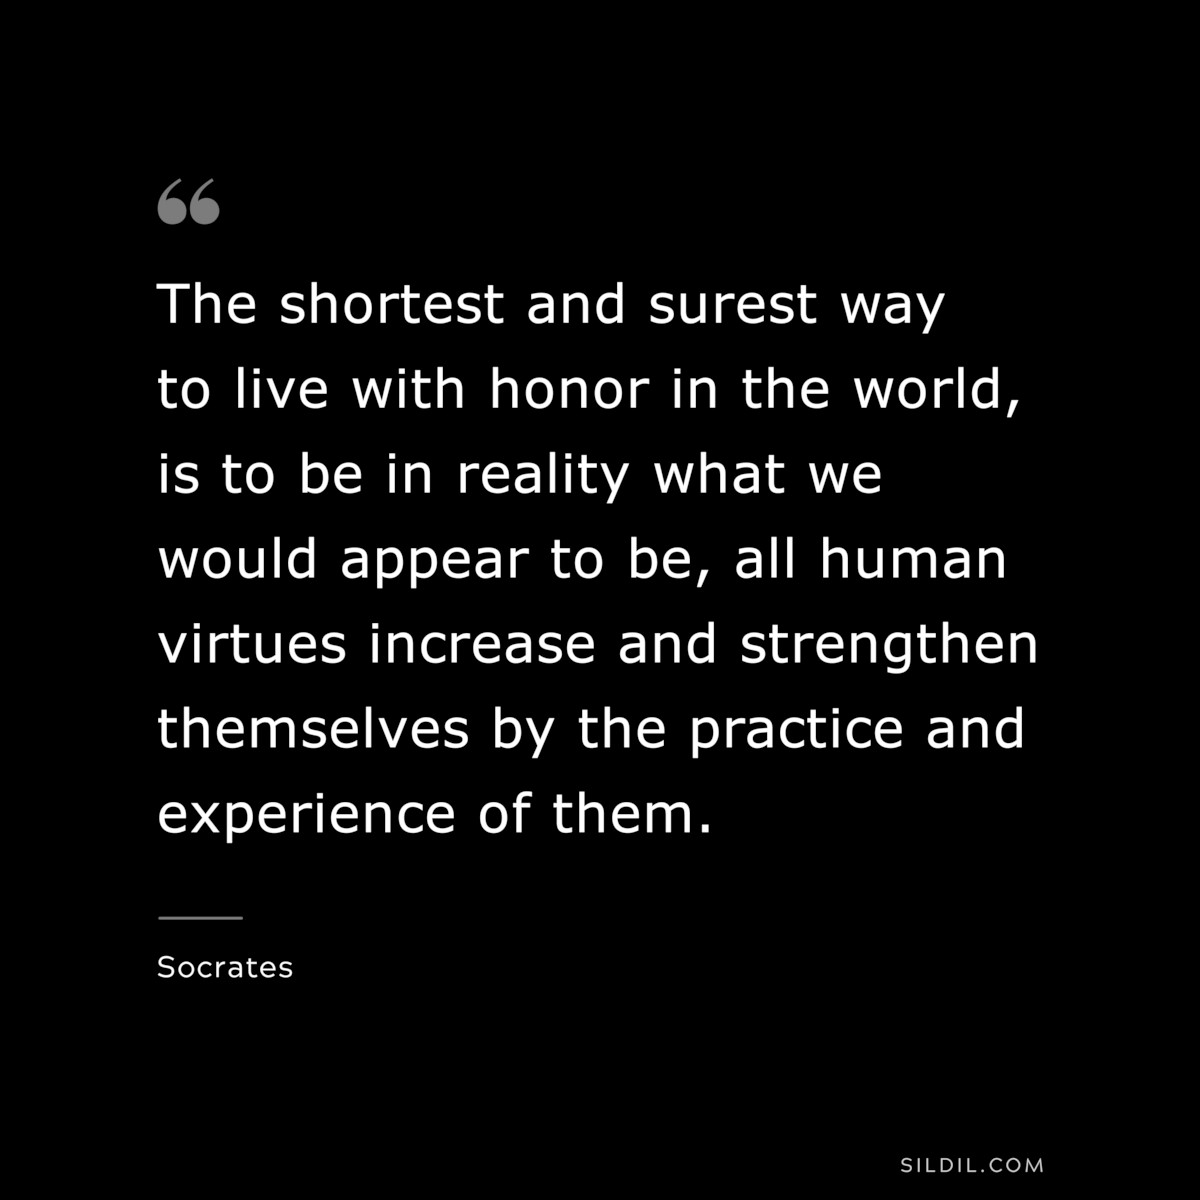 The shortest and surest way to live with honor in the world, is to be in reality what we would appear to be, all human virtues increase and strengthen themselves by the practice and experience of them. ― Socrates